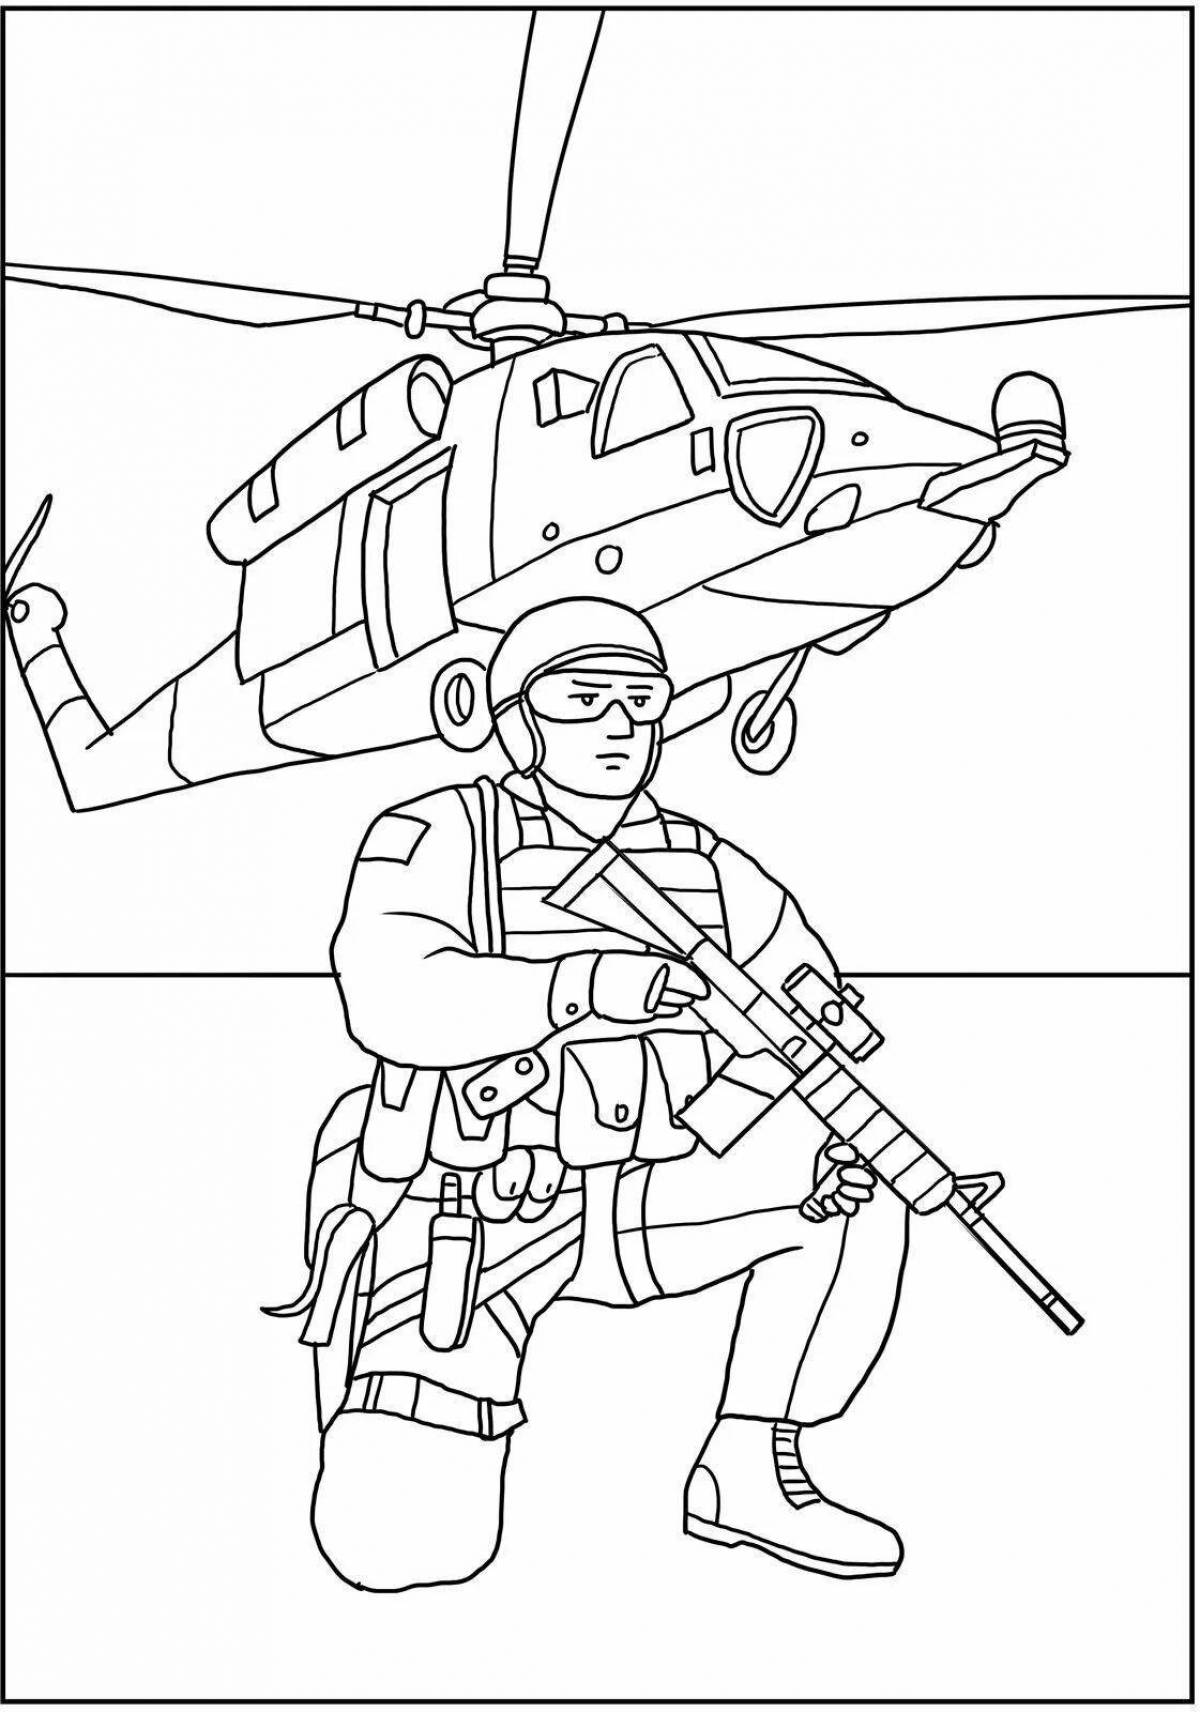 Coloring for children military soldiers